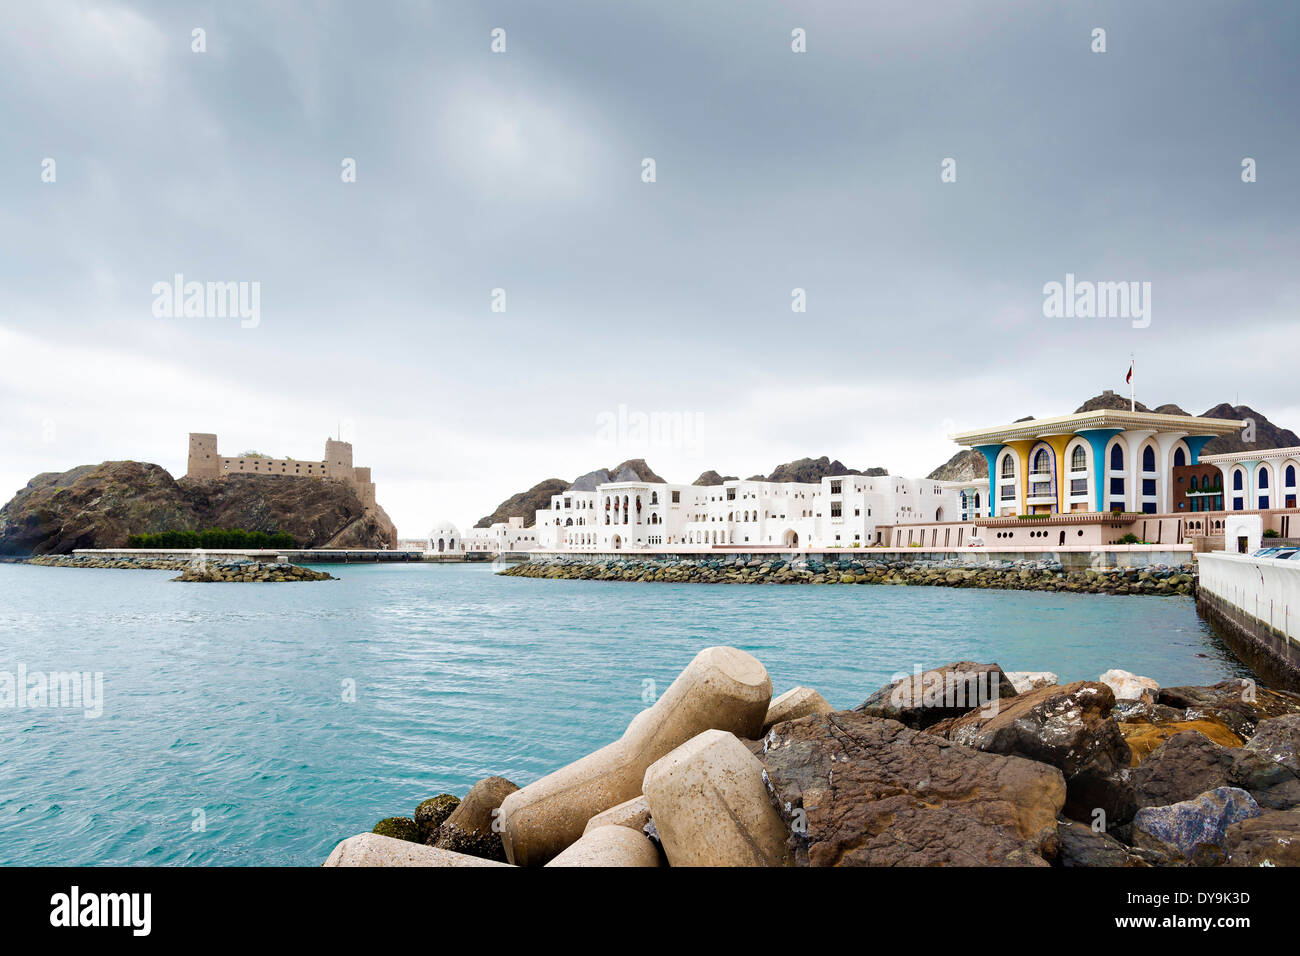 Picture of Sultan Qaboos Palace in Muscat, Oman Stock Photo